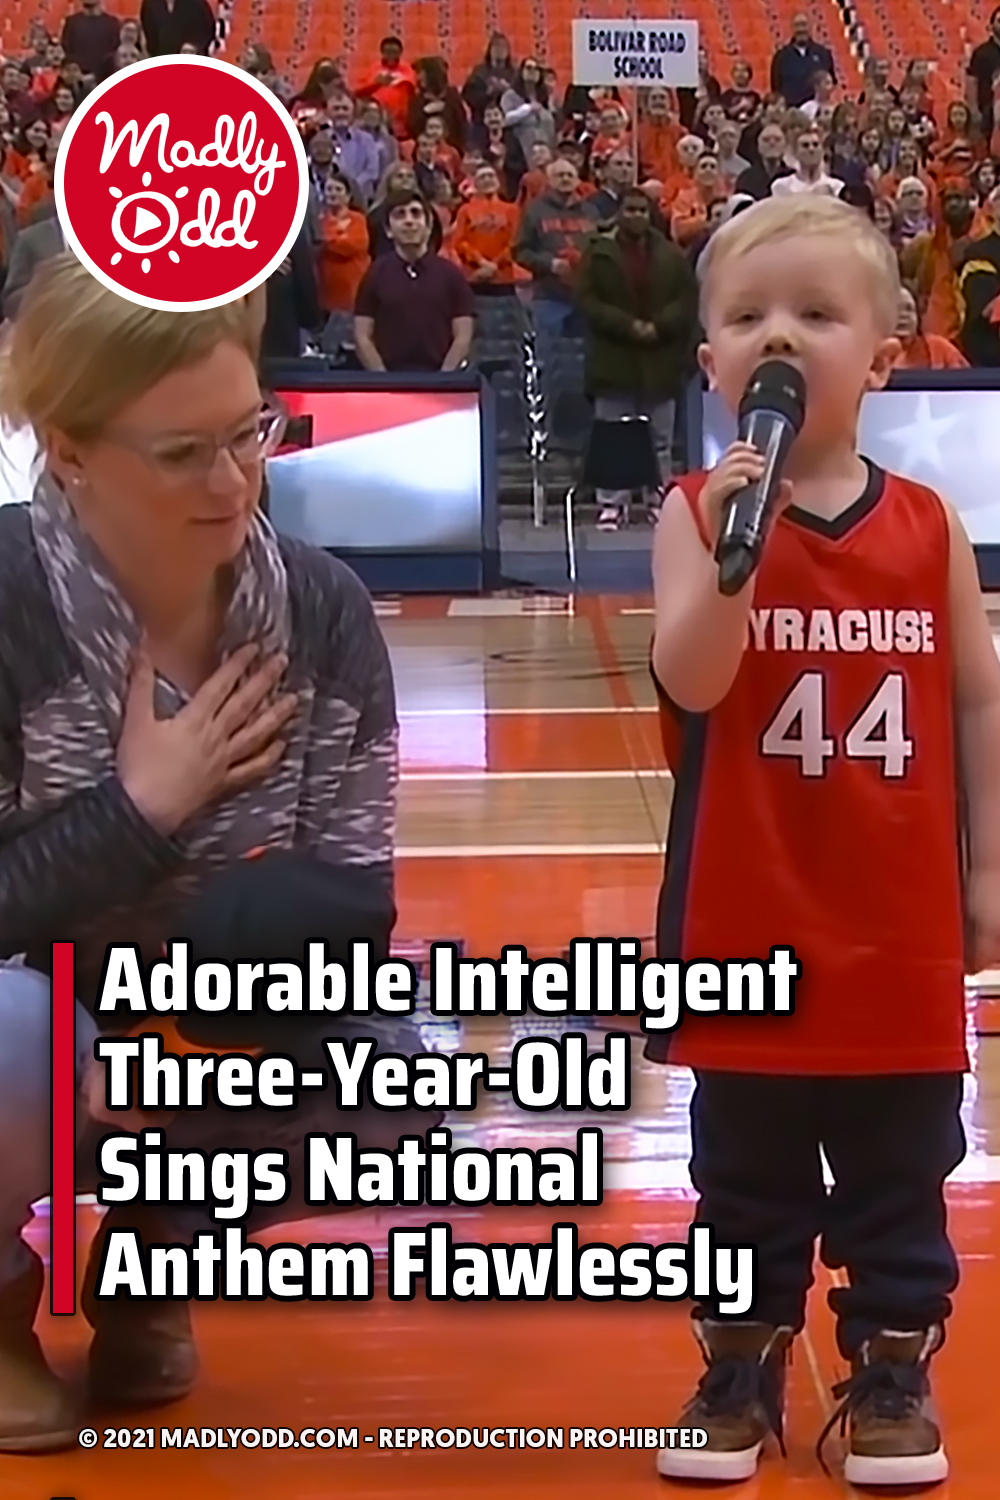 Adorable Intelligent Three-Year-Old Sings National Anthem Flawlessly